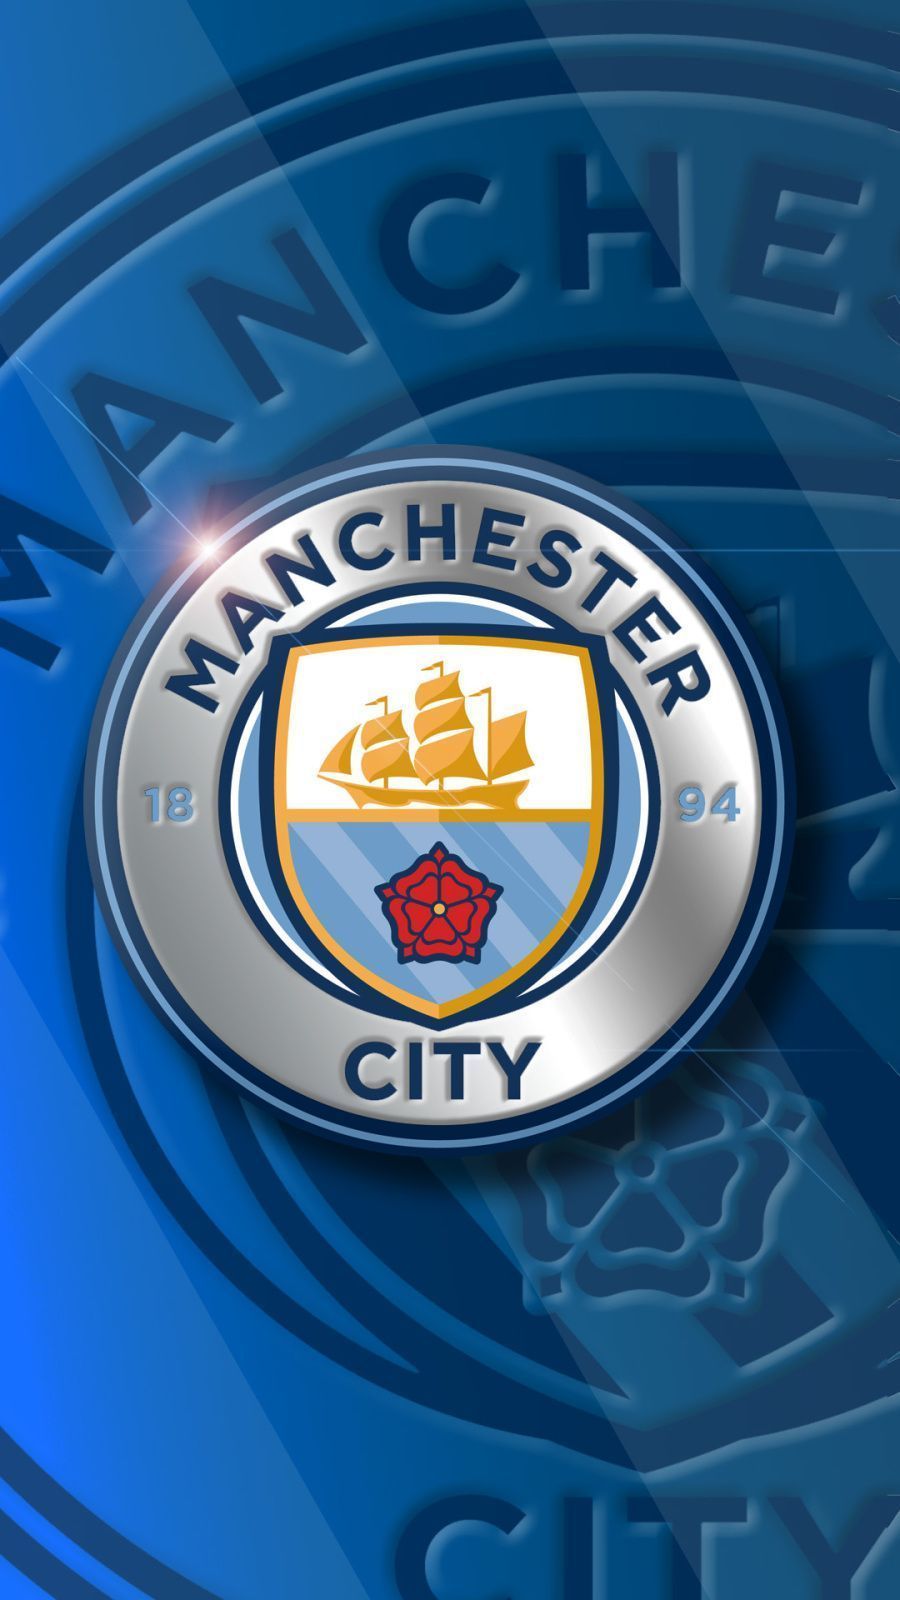 Manchester City FC Wallpapers - Top 35 Best Manchester City FC Wallpapers  Download